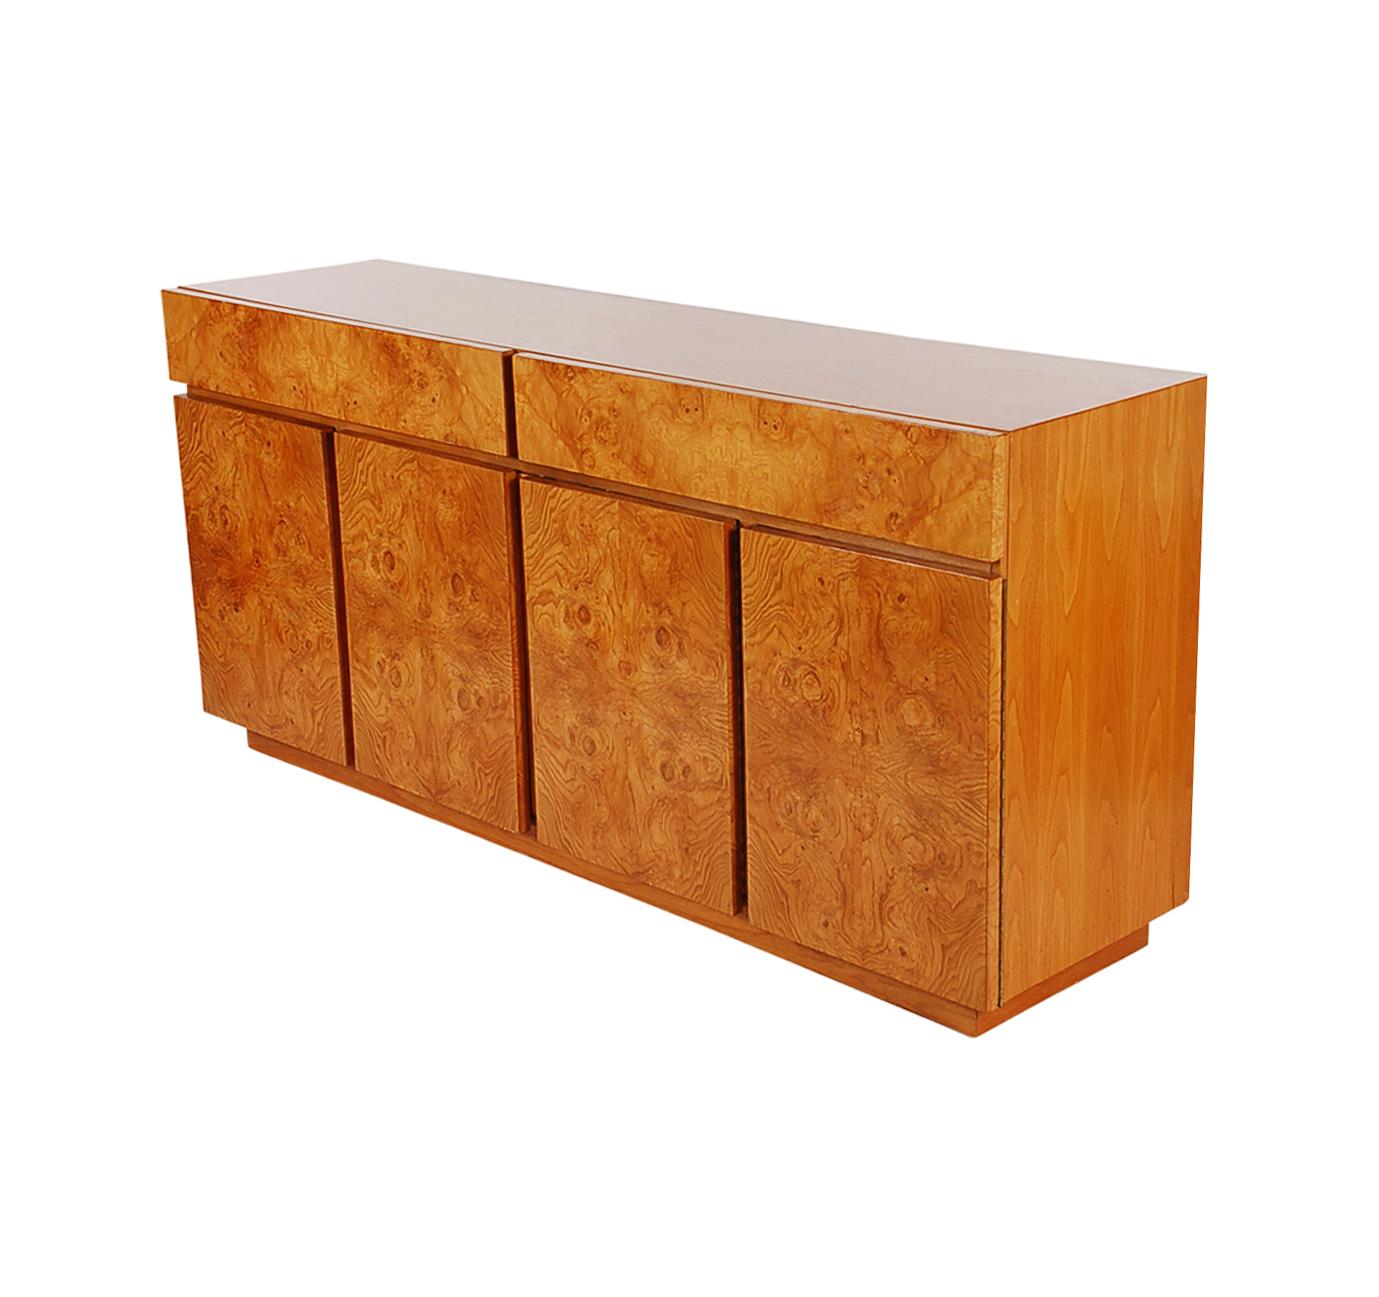 American Mid-Century Modern Burl Cabinet or Credenza by Roland Carter for Lane